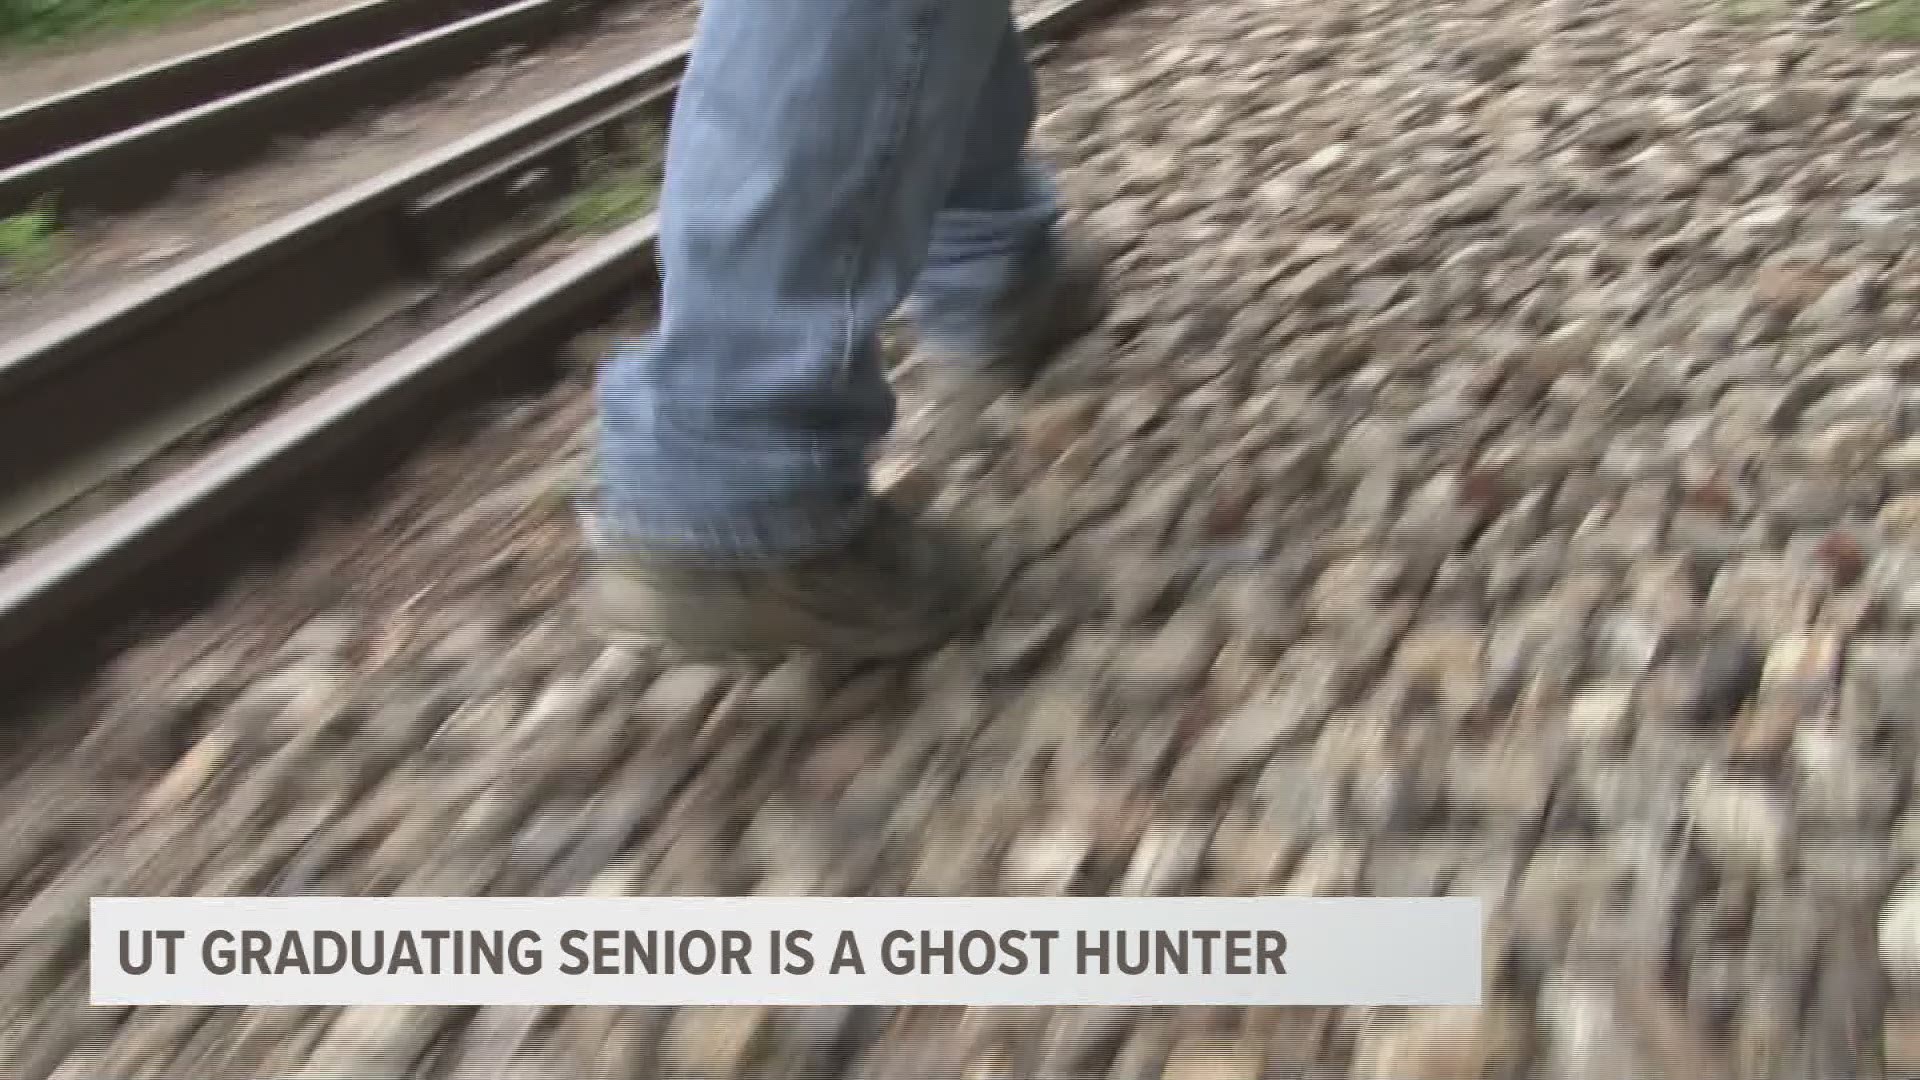 A student about to graduate from the University of Tennessee is also a ghost hunter.